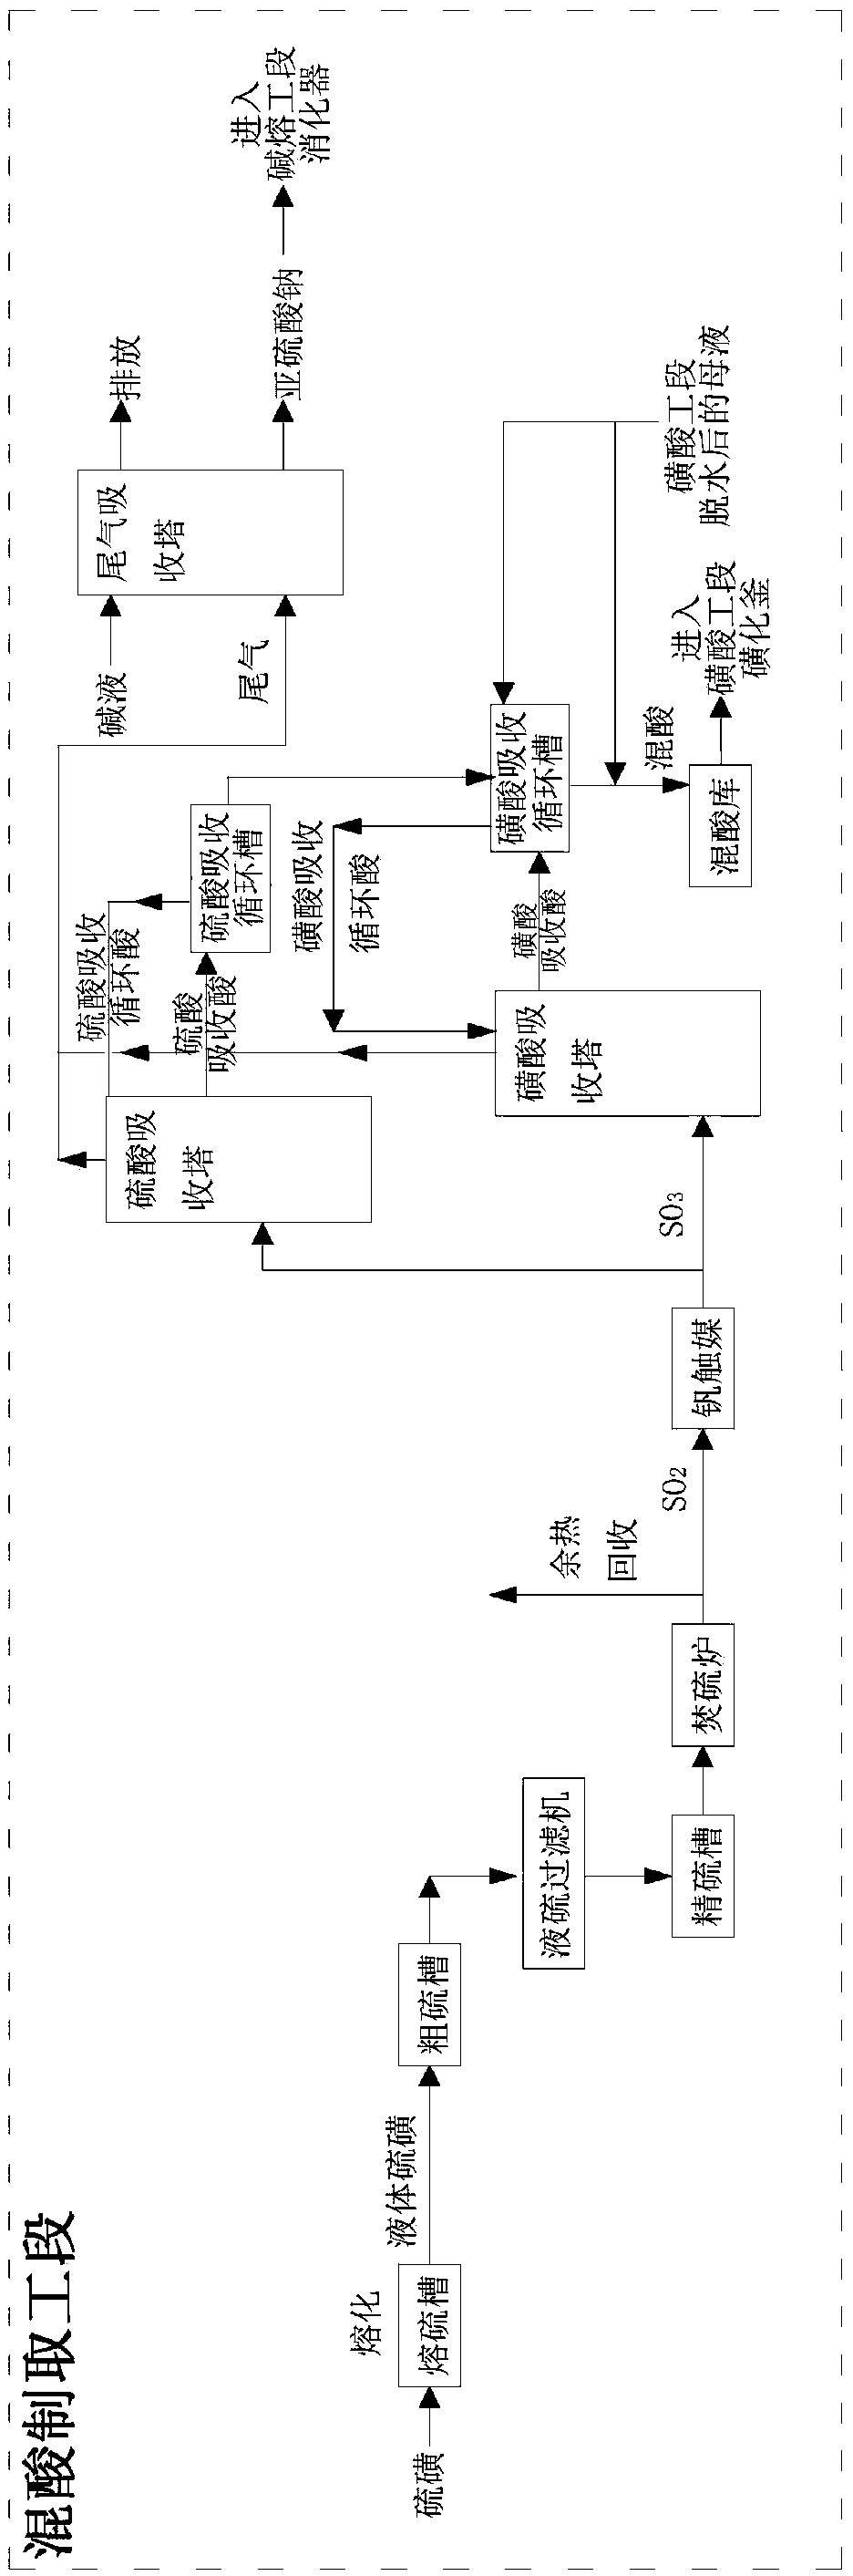 Preparation method and device for p-cresol